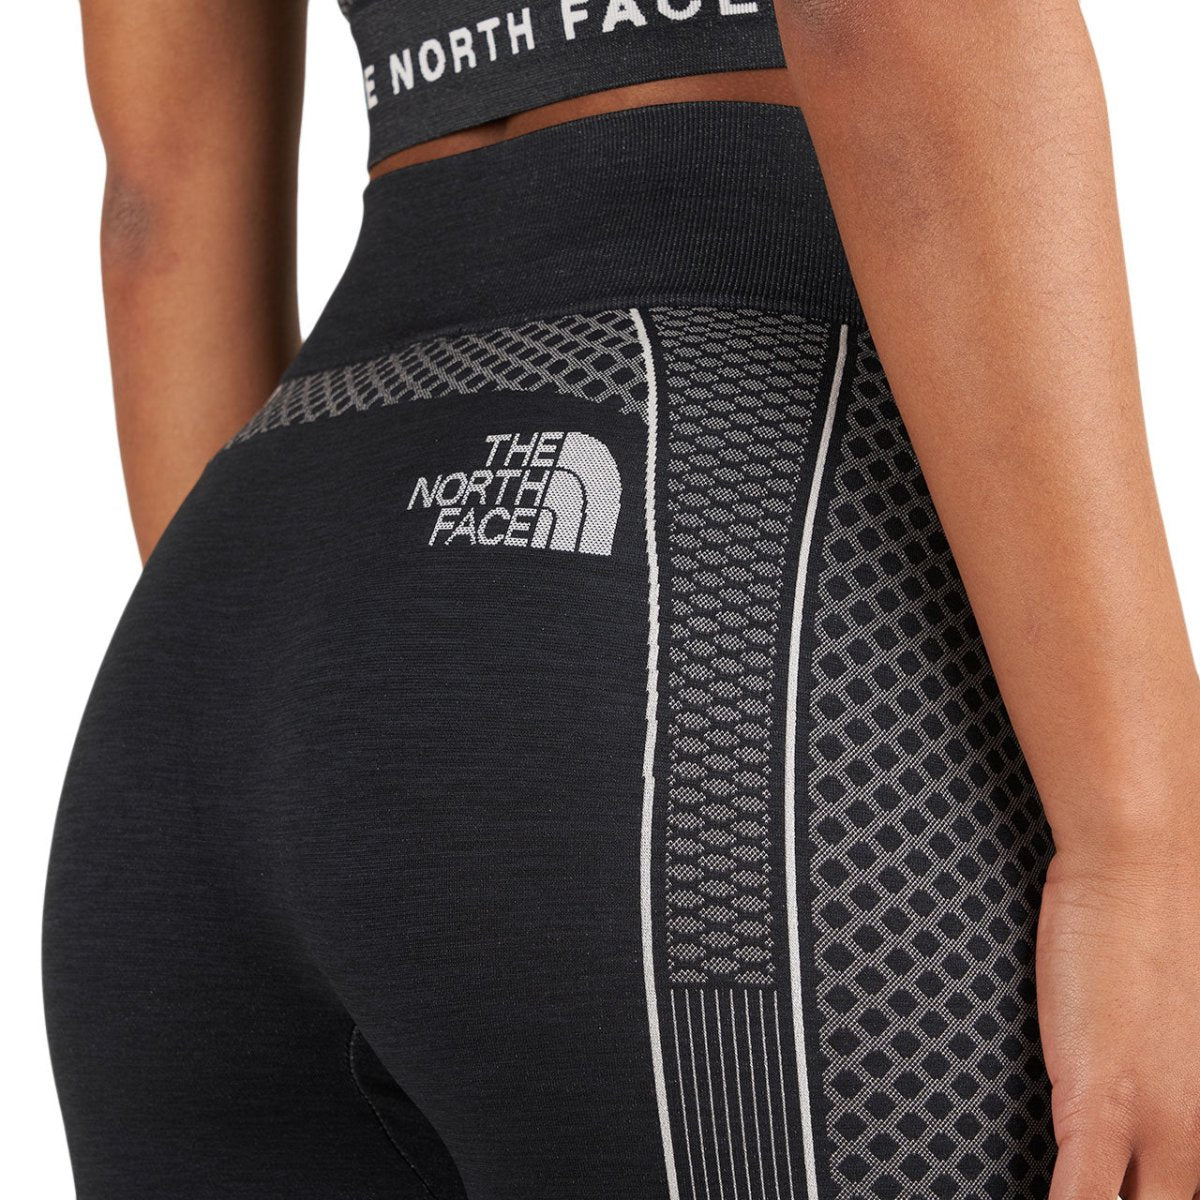 The North Face WMNS Baselayer Bottoms (Schwarz)  - Allike Store